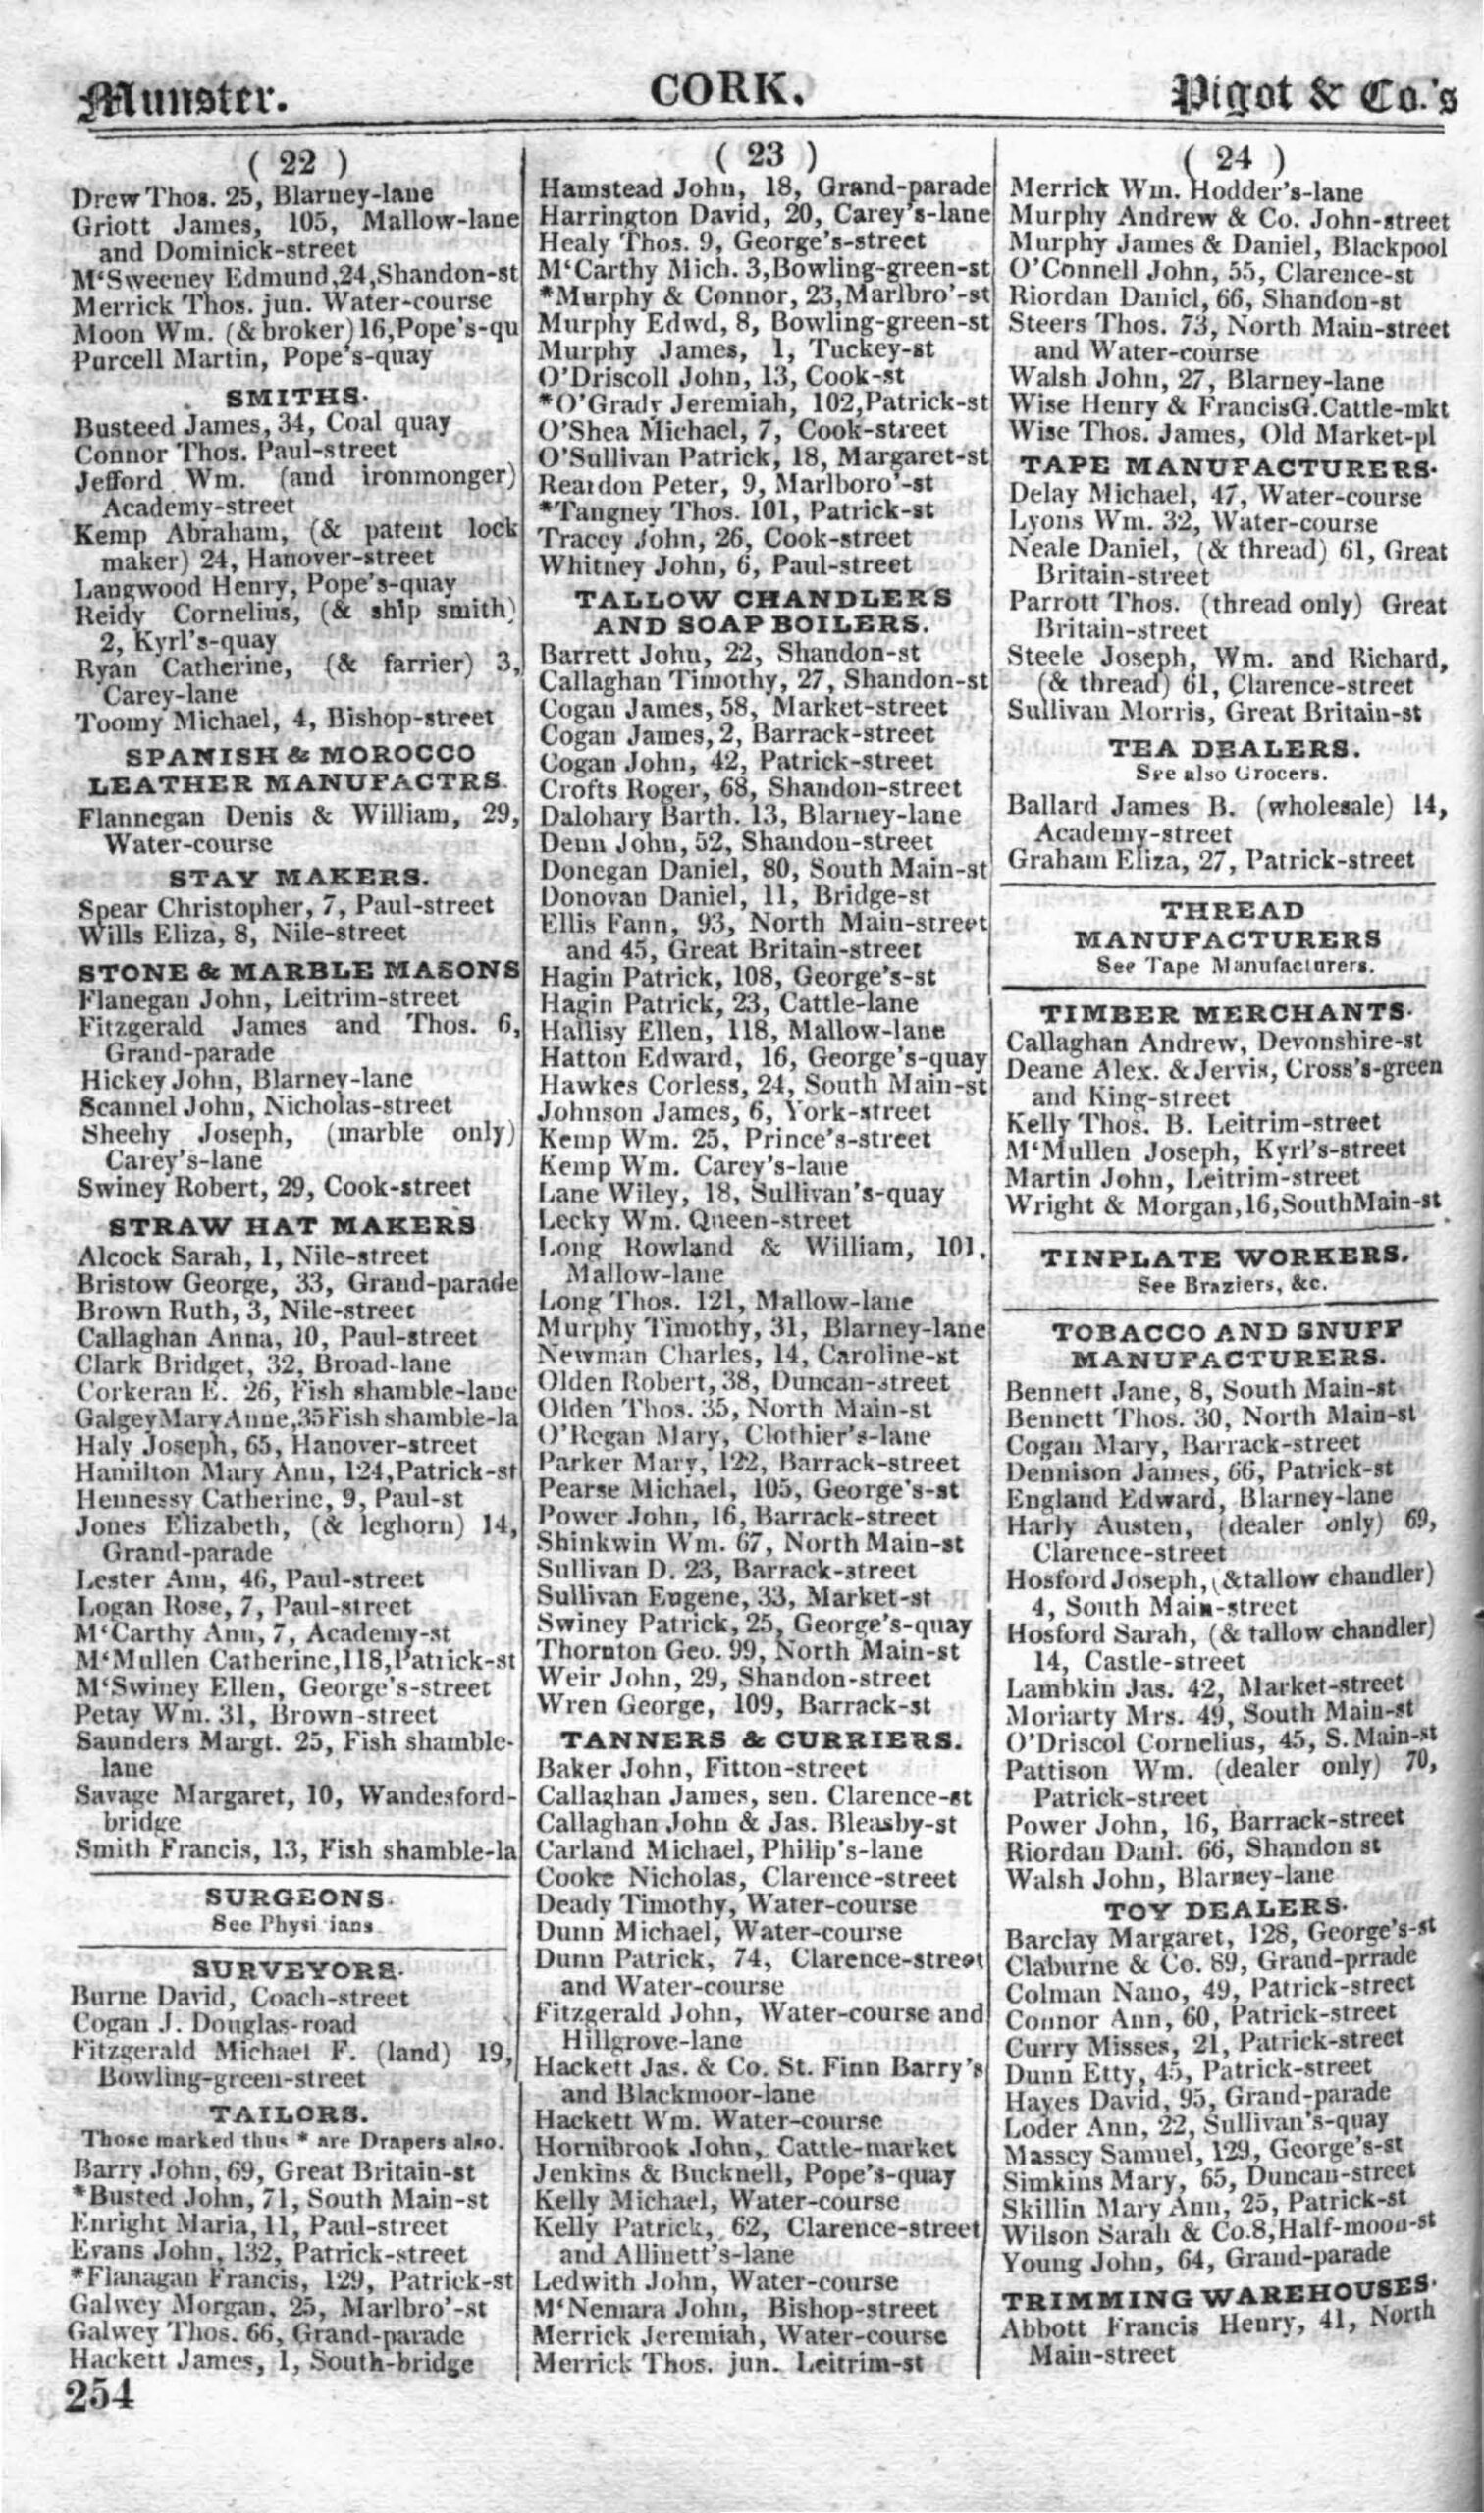 C:\Users\Virginia Rundle\Documents\Ancestry\Wise Files\Wises from Cork\Wises Henry Francis and Thomas James, Cattle Markets Pigot and Co Advert 1824.jpg